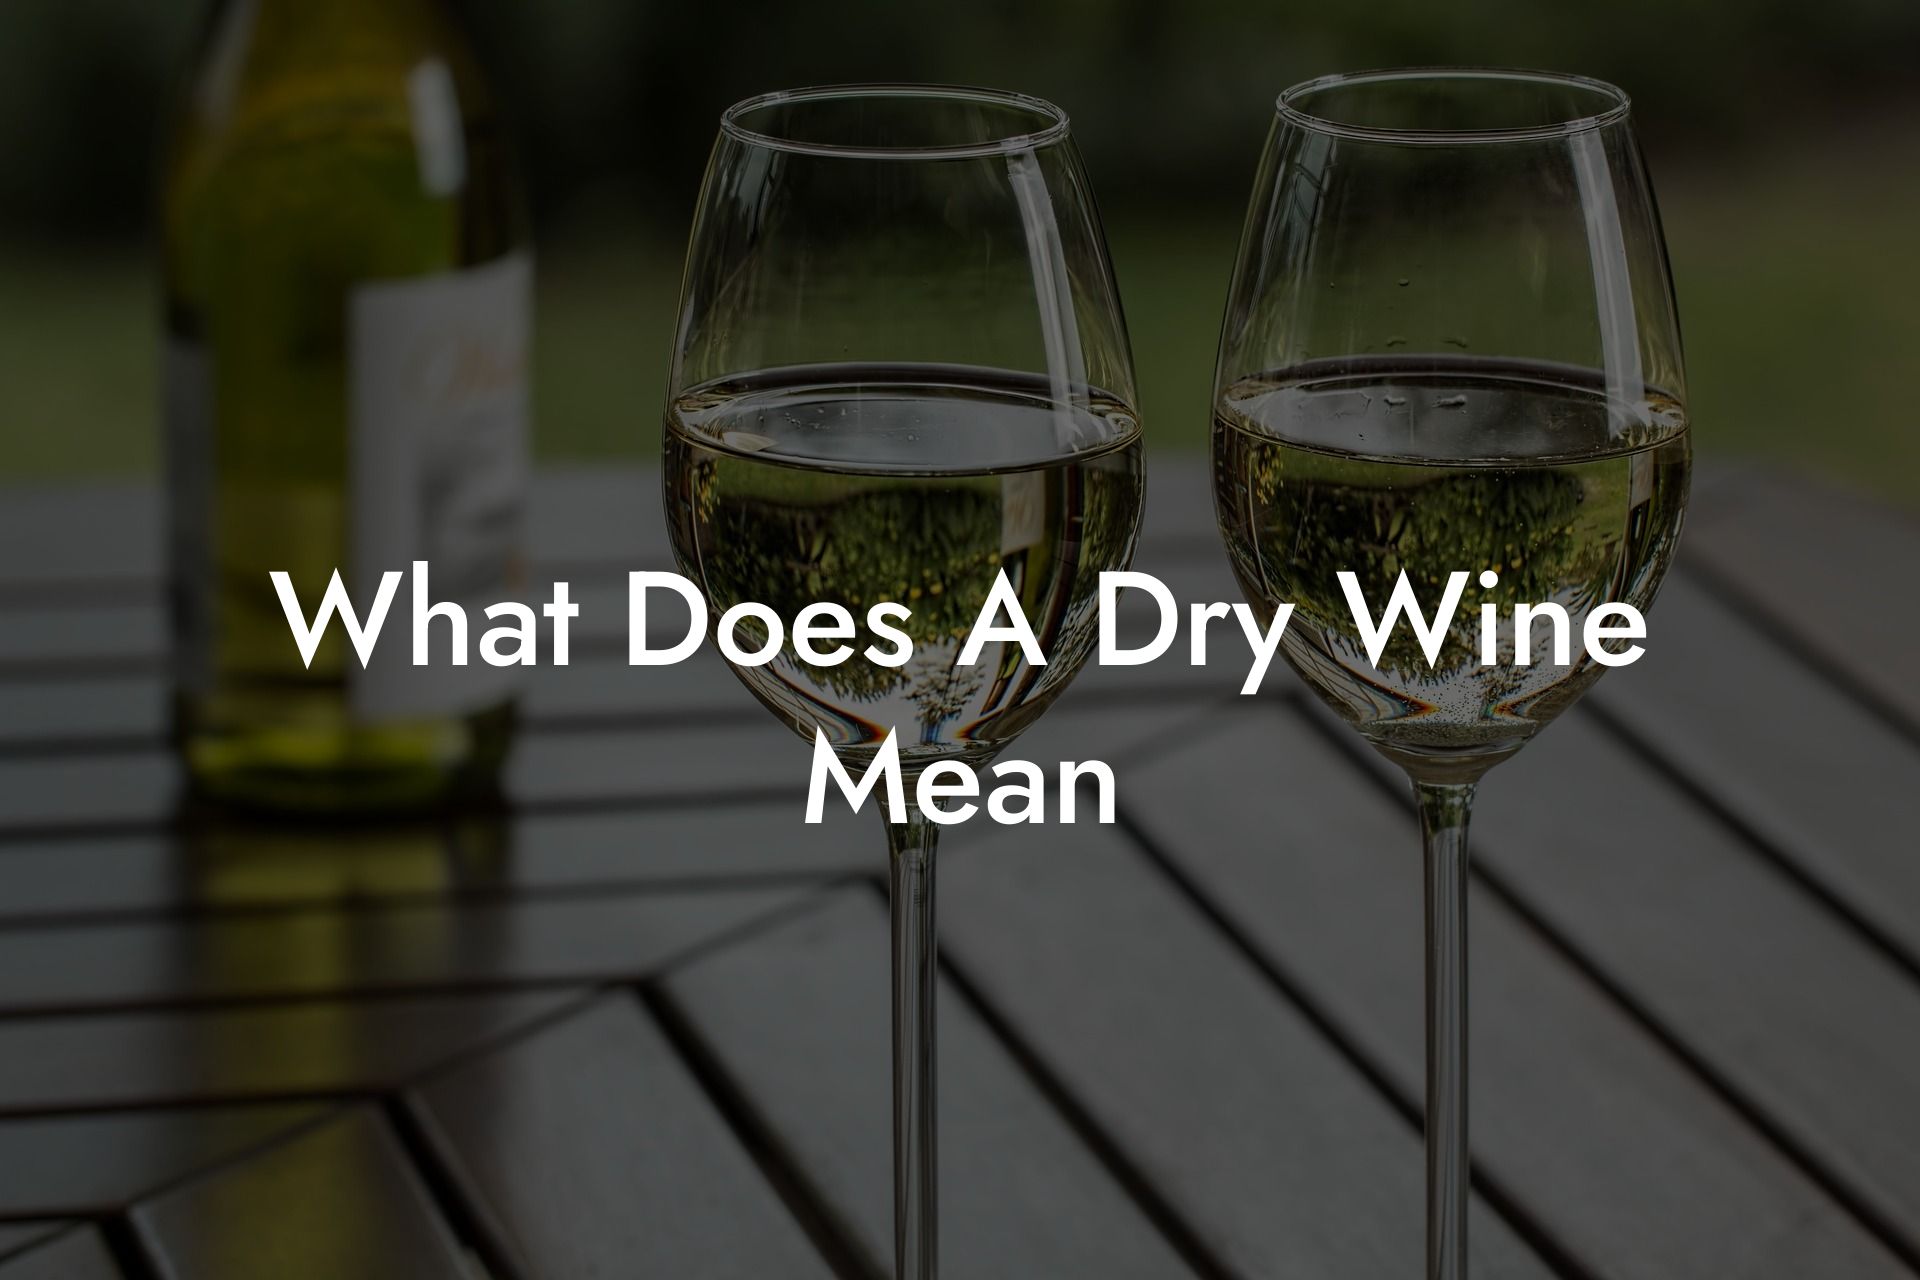 What Does A Dry Wine Mean